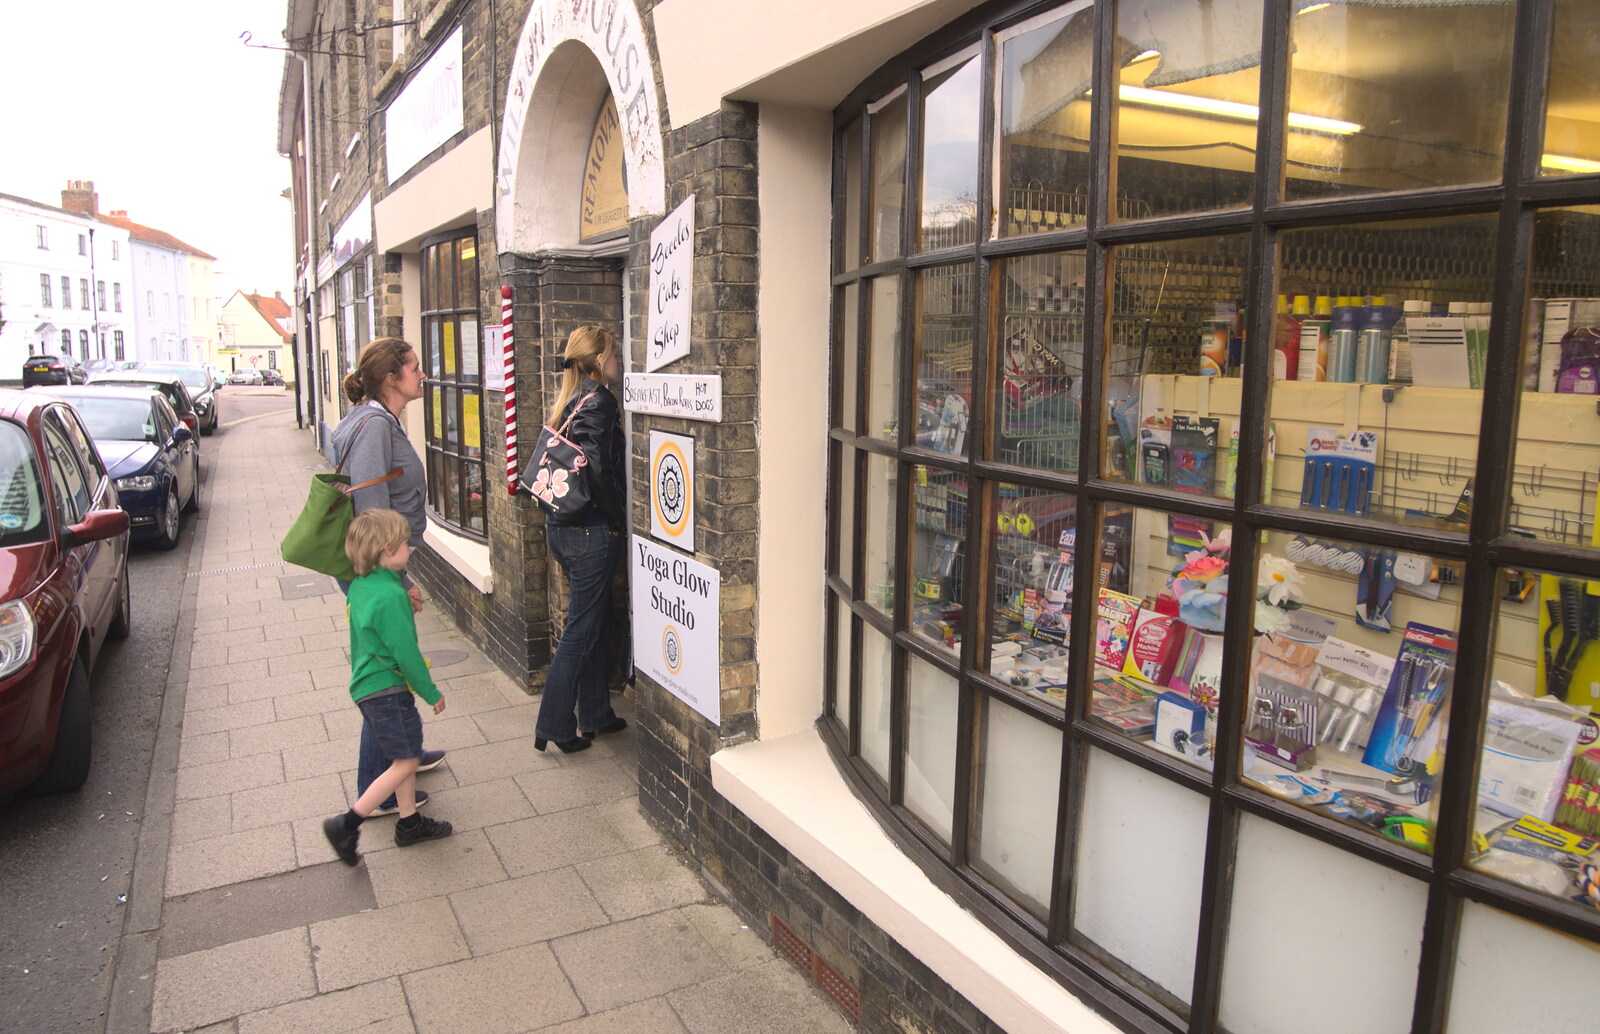 Isobel and Harry head into a closed shop from A Postcard from Beccles, Suffolk - 2nd April 2017